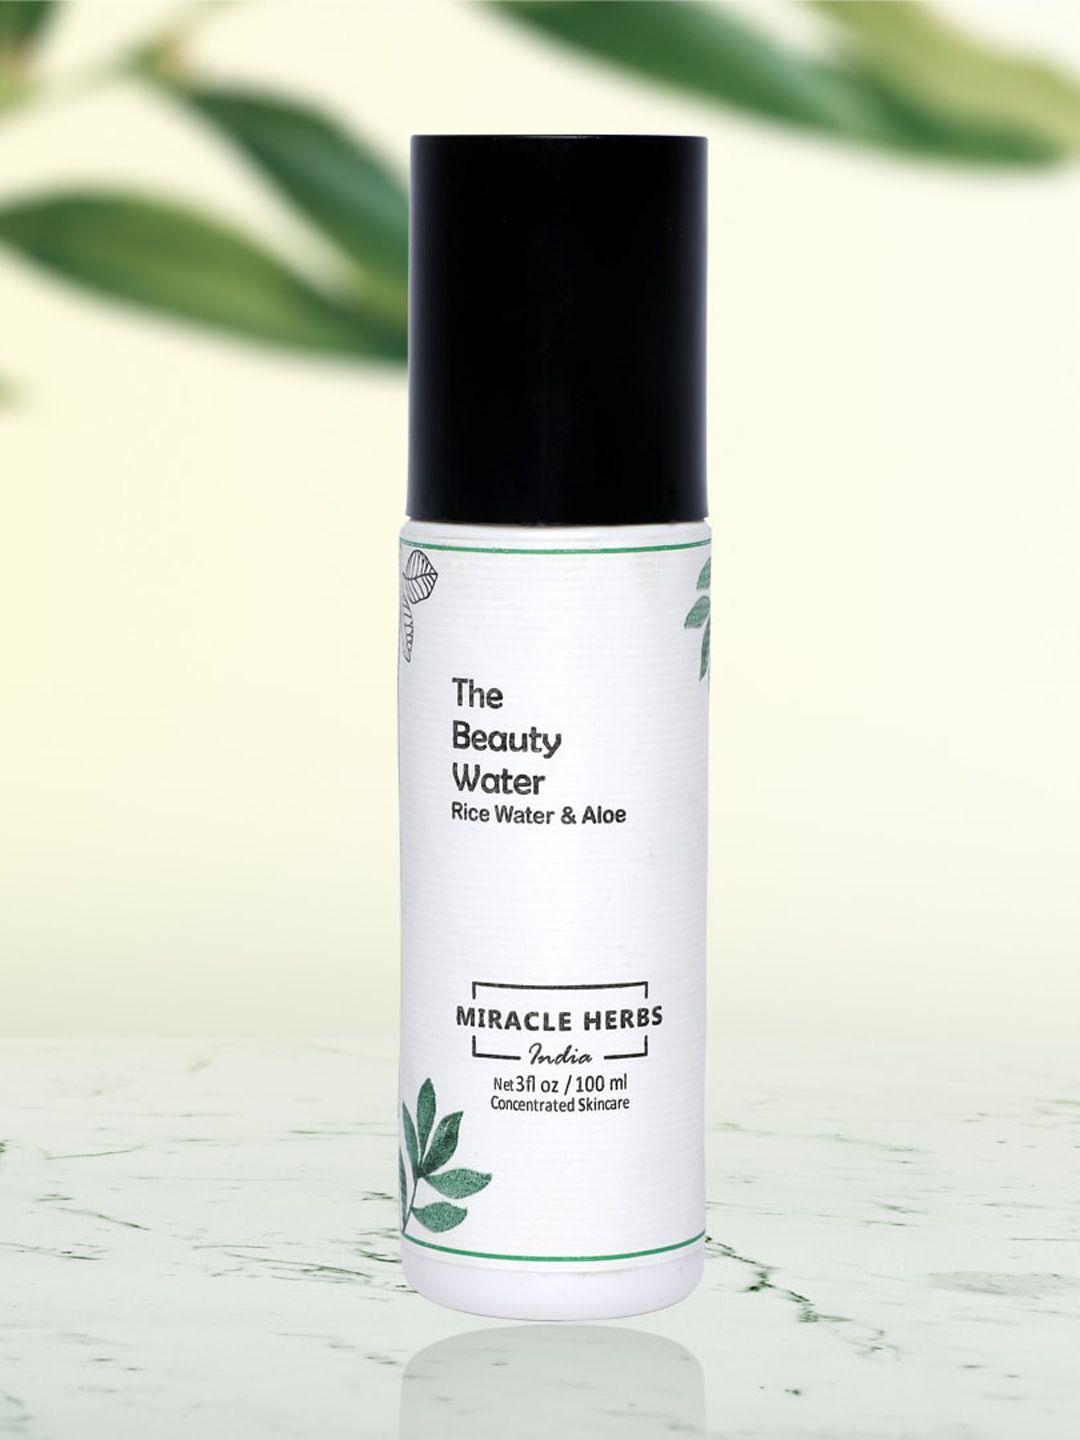 miracle herbs the beauty water rice water & aloe face toner - 100 ml